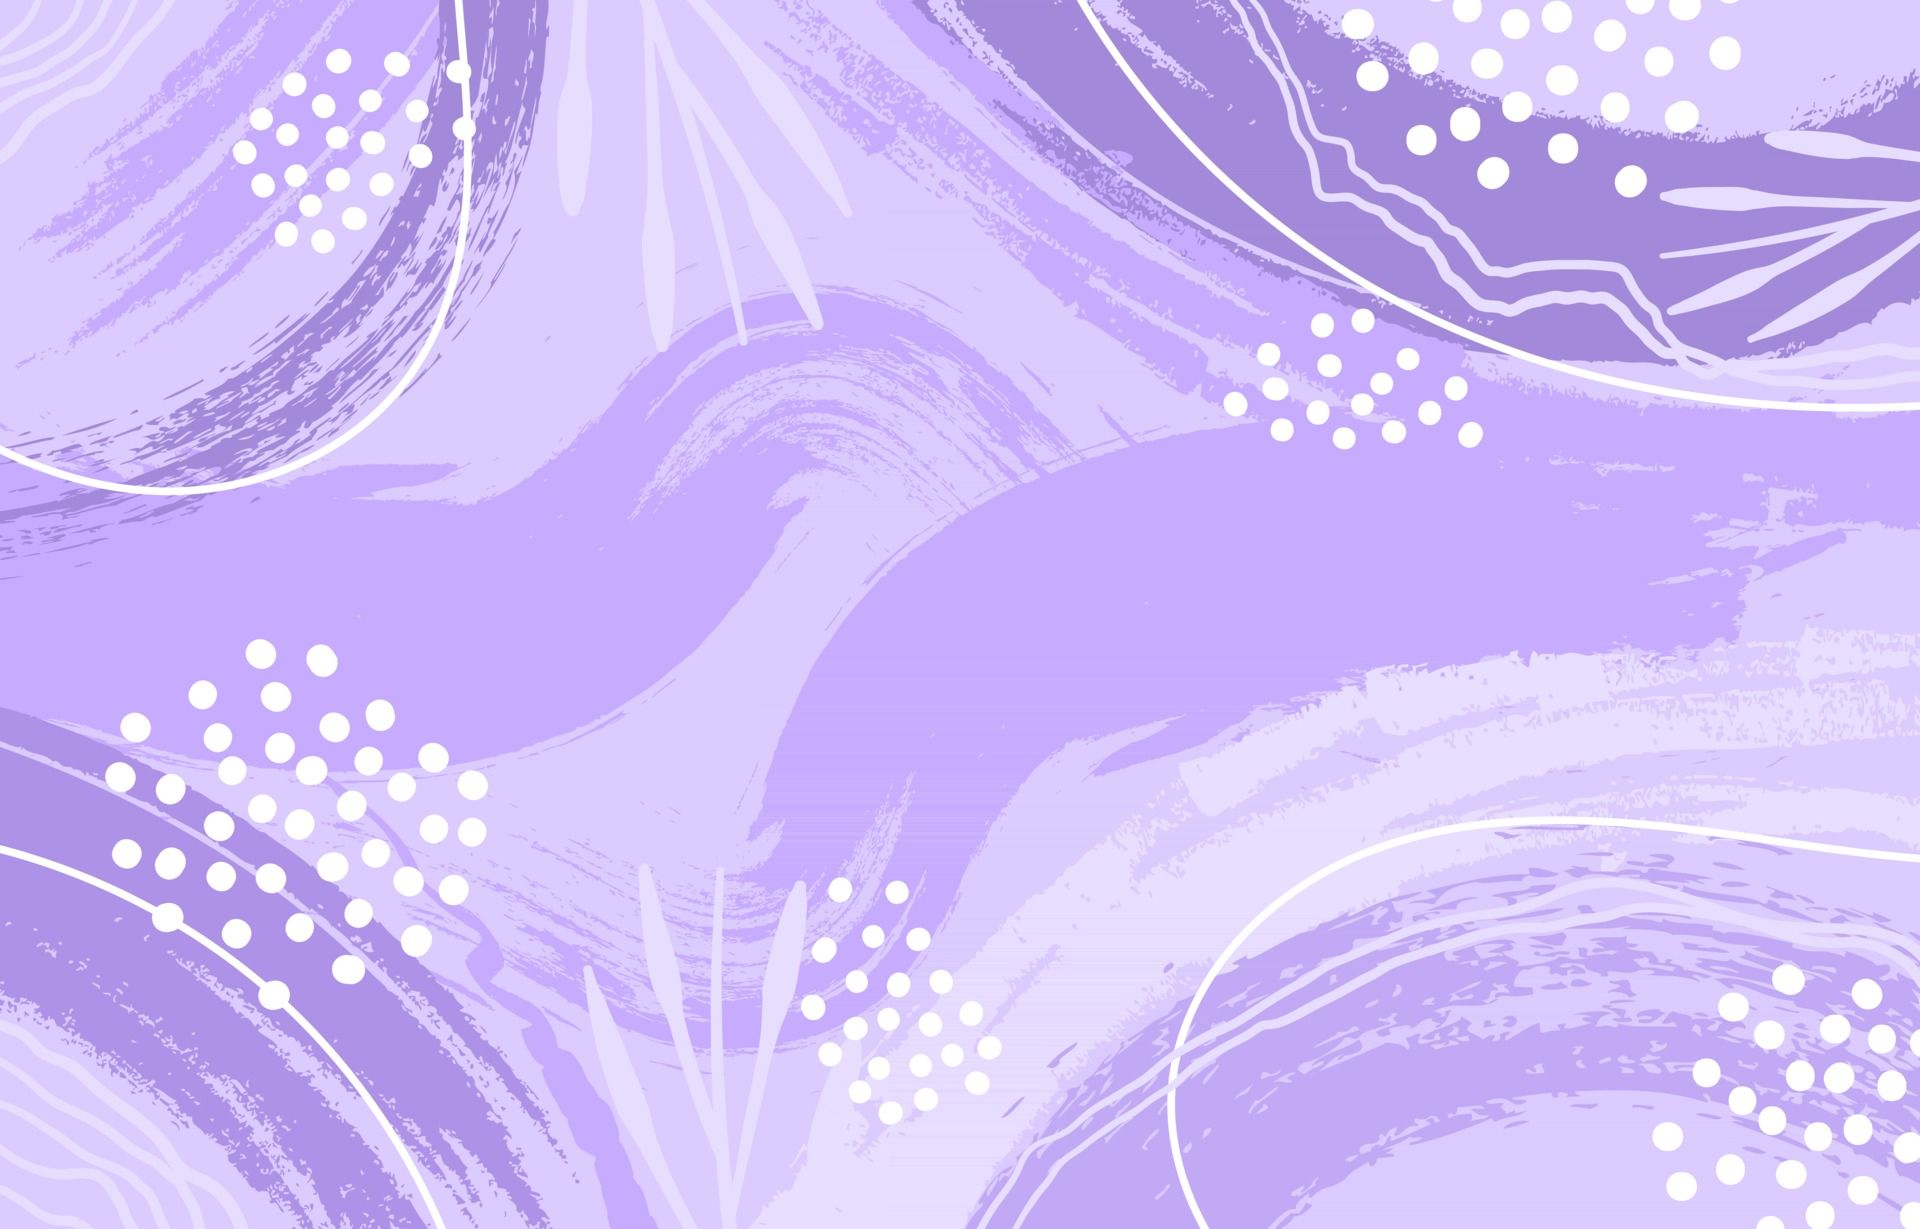 A purple abstract background with brush strokes and dots - Pastel purple, violet, light purple